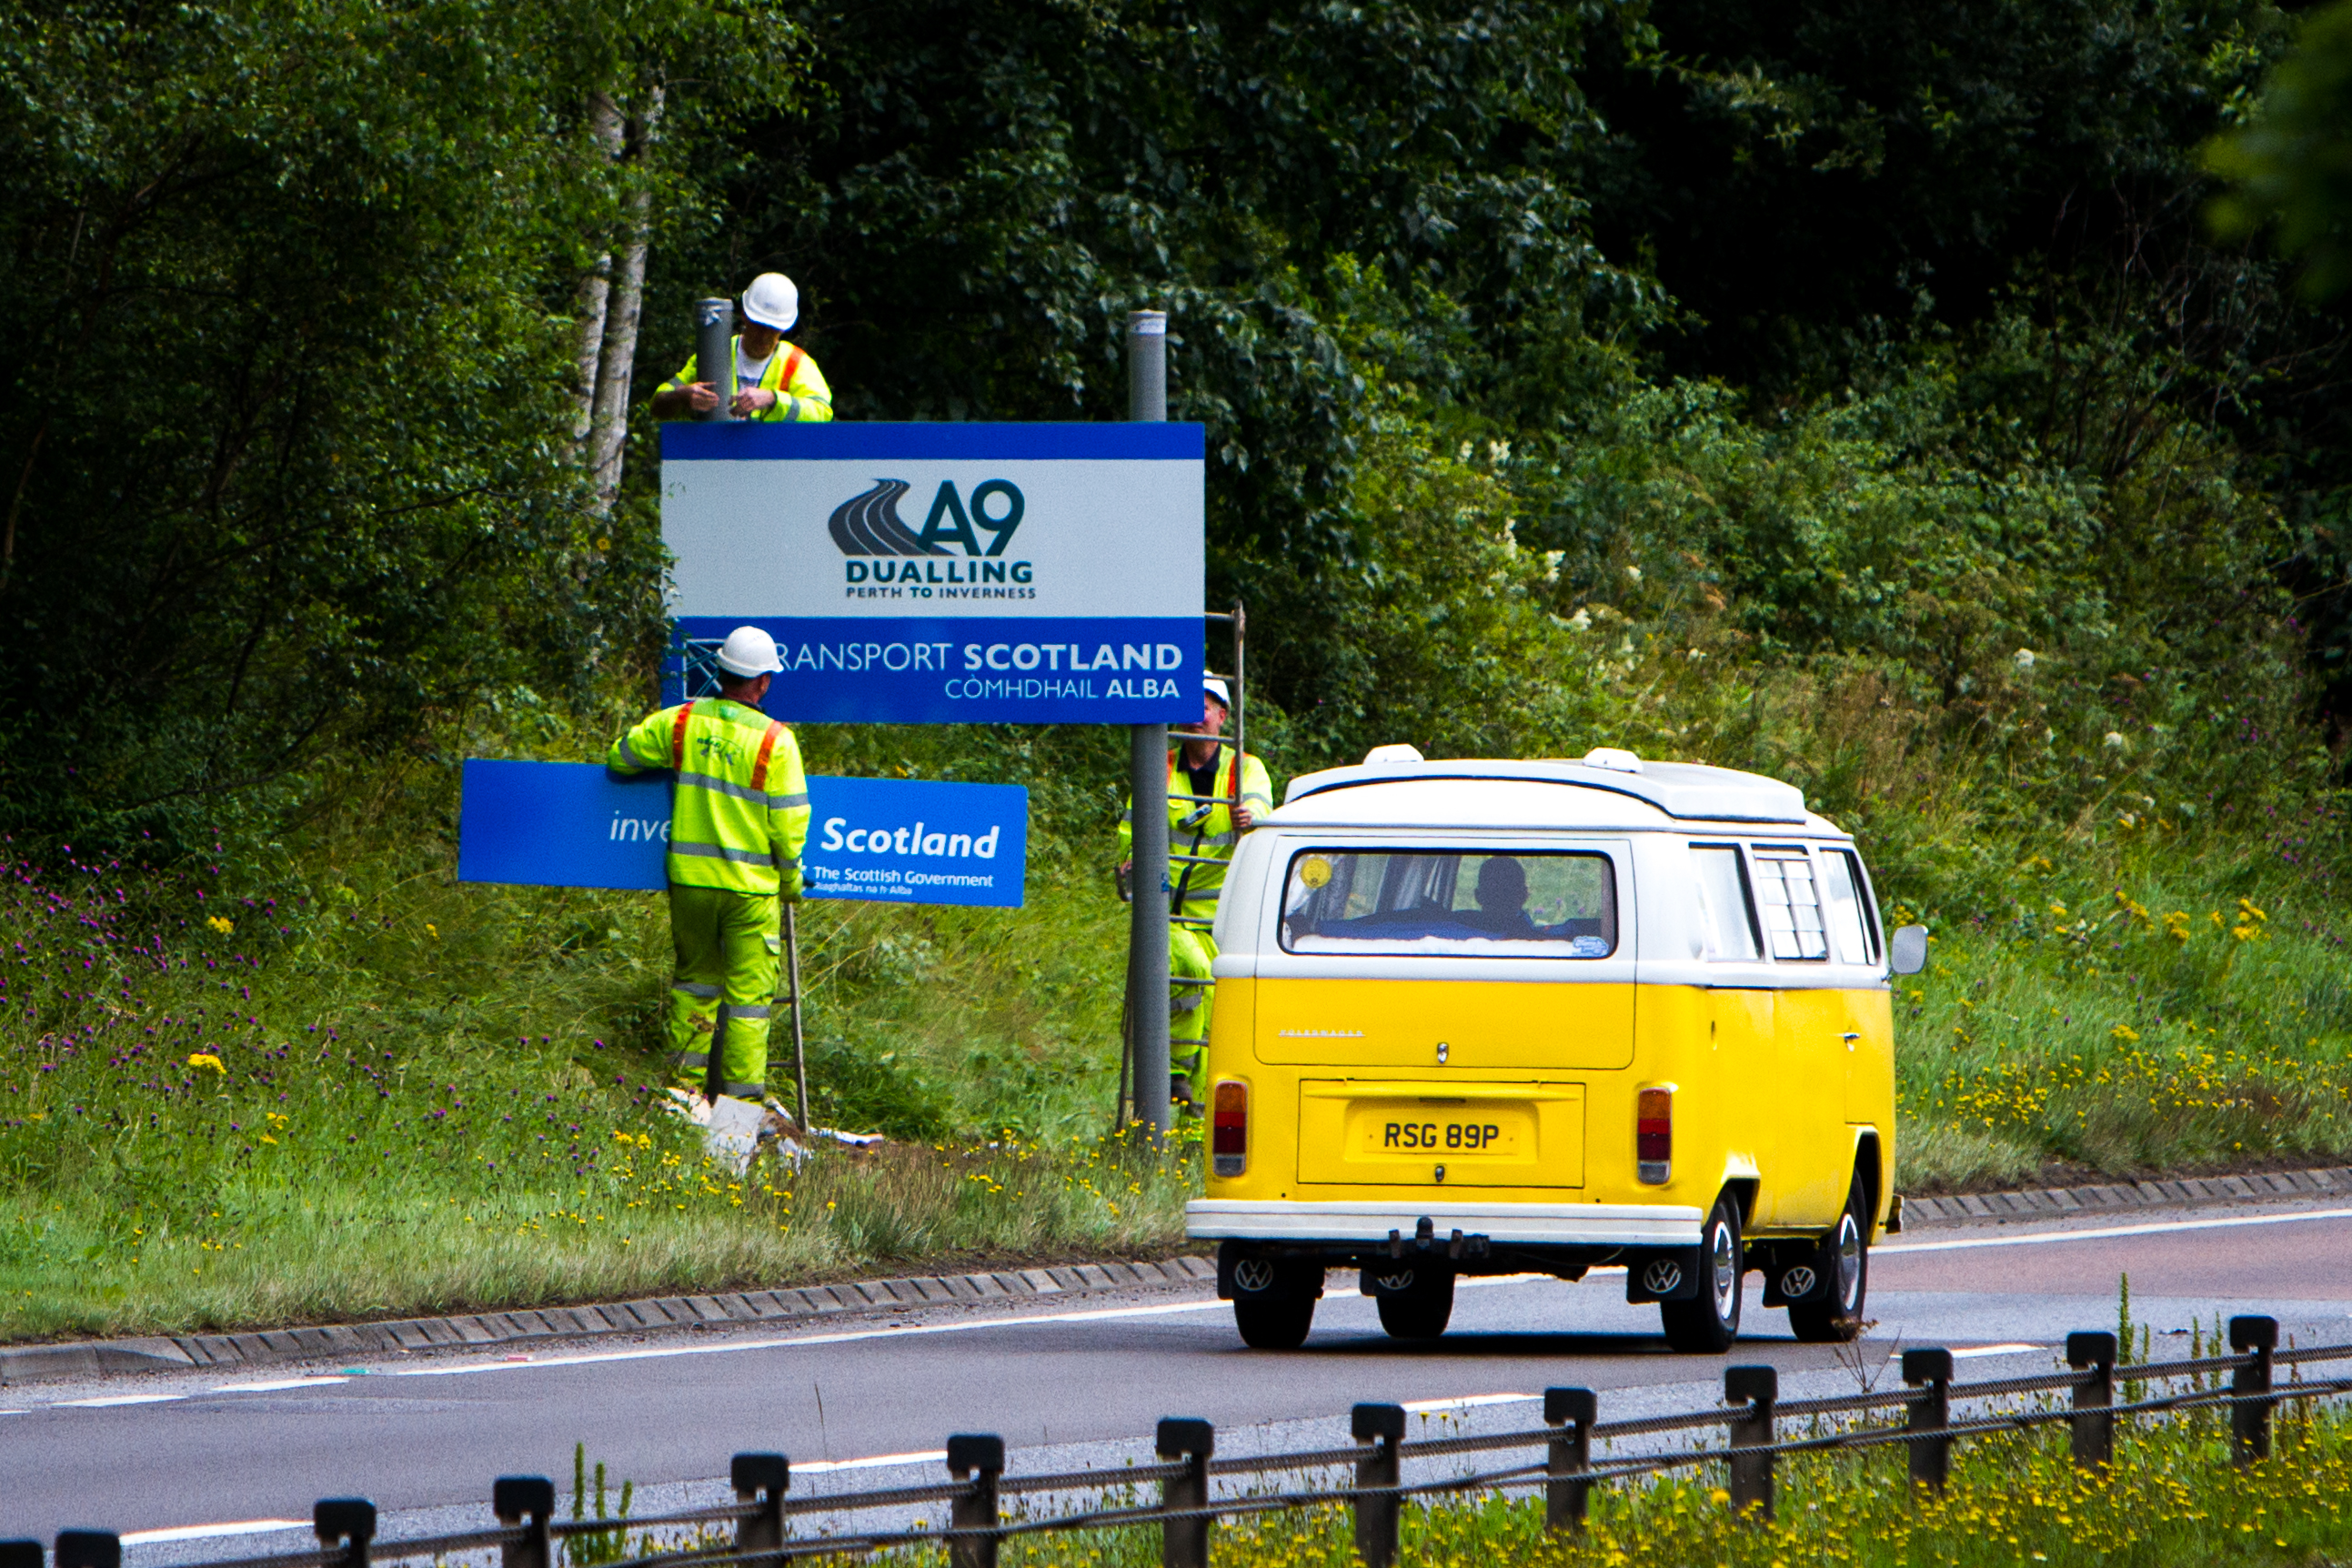 Signs for the A9 dualling project being put up north of Perth.